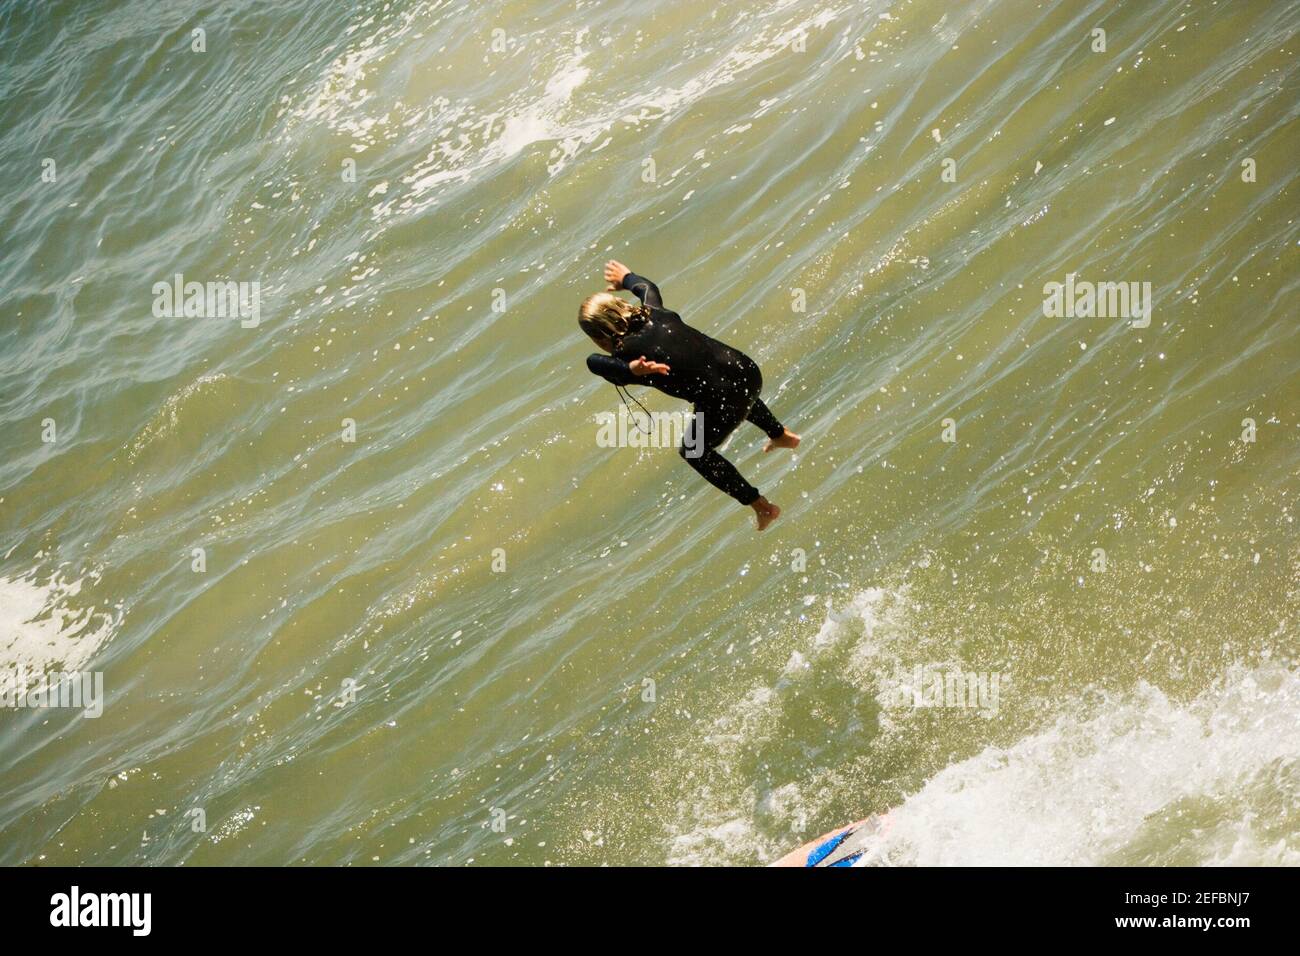 High angle view of a boogie boarder on the beach Stock Photo